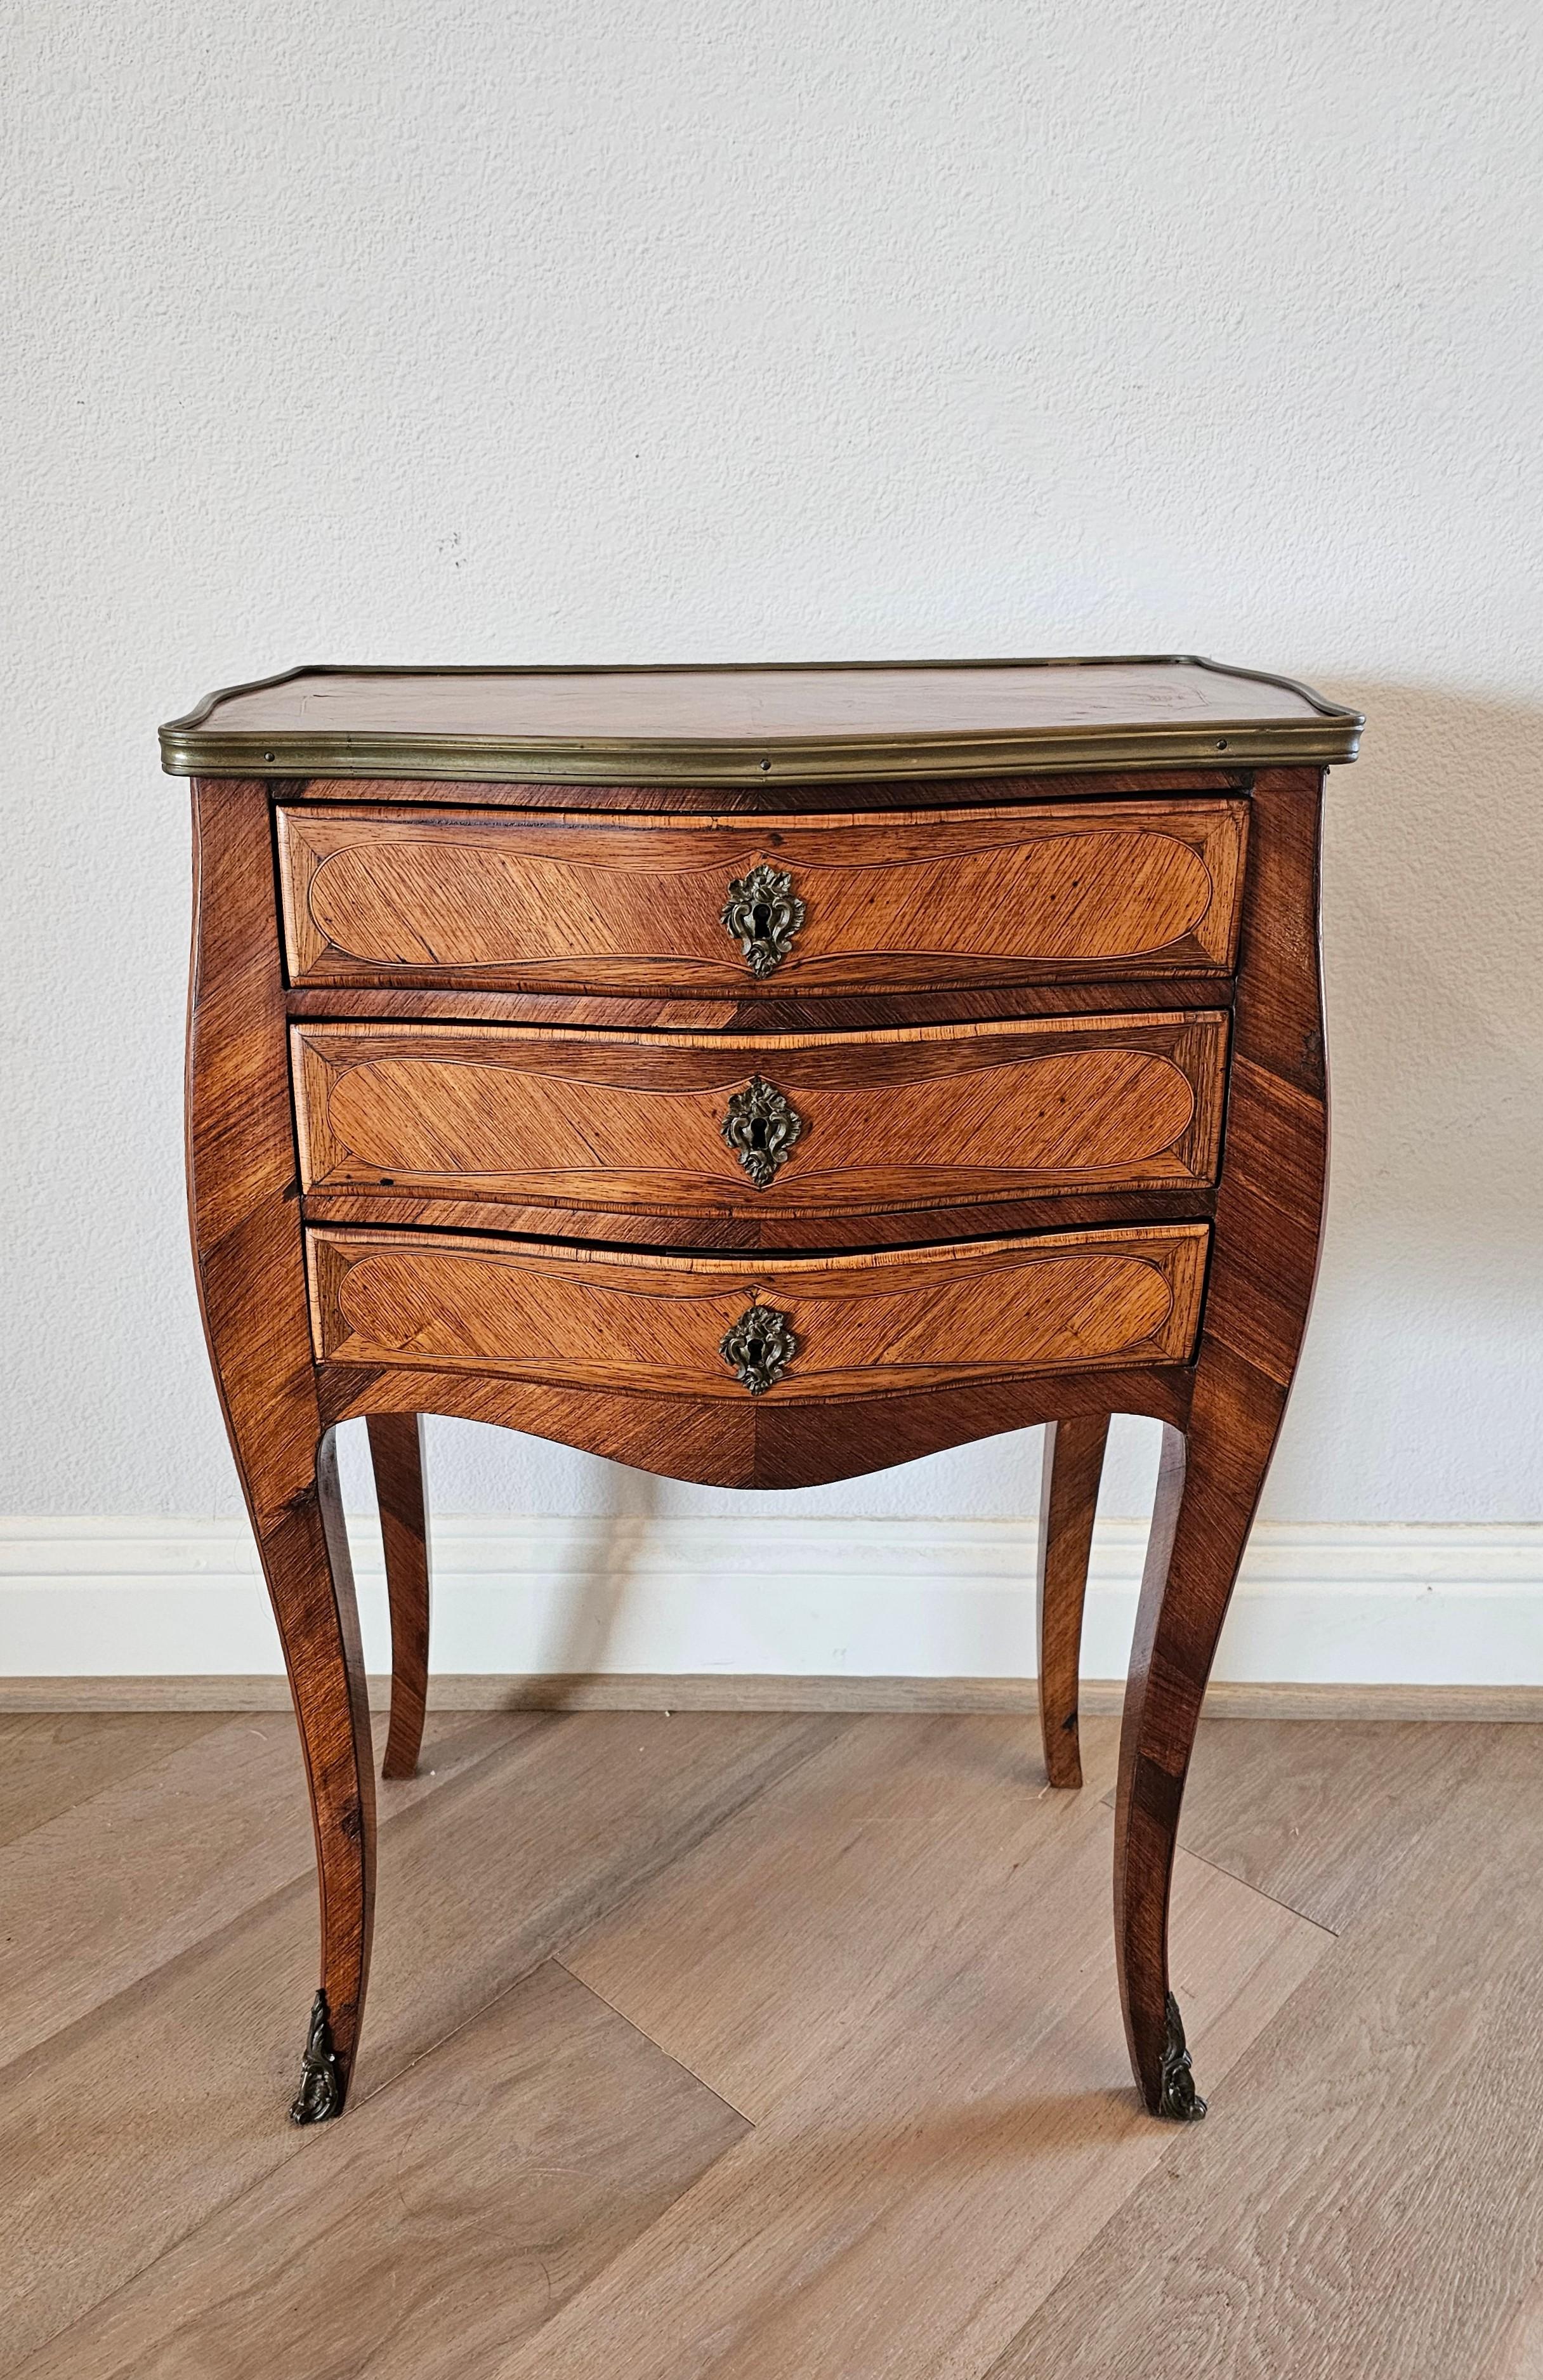 A charming fine quality antique French Louis 15th style matched-veneer parquetry chest of drawers nightstand - end table.

19th Century, France, displaying the refined elegance and sophistication that King Louis Fifteenth furniture is known for,